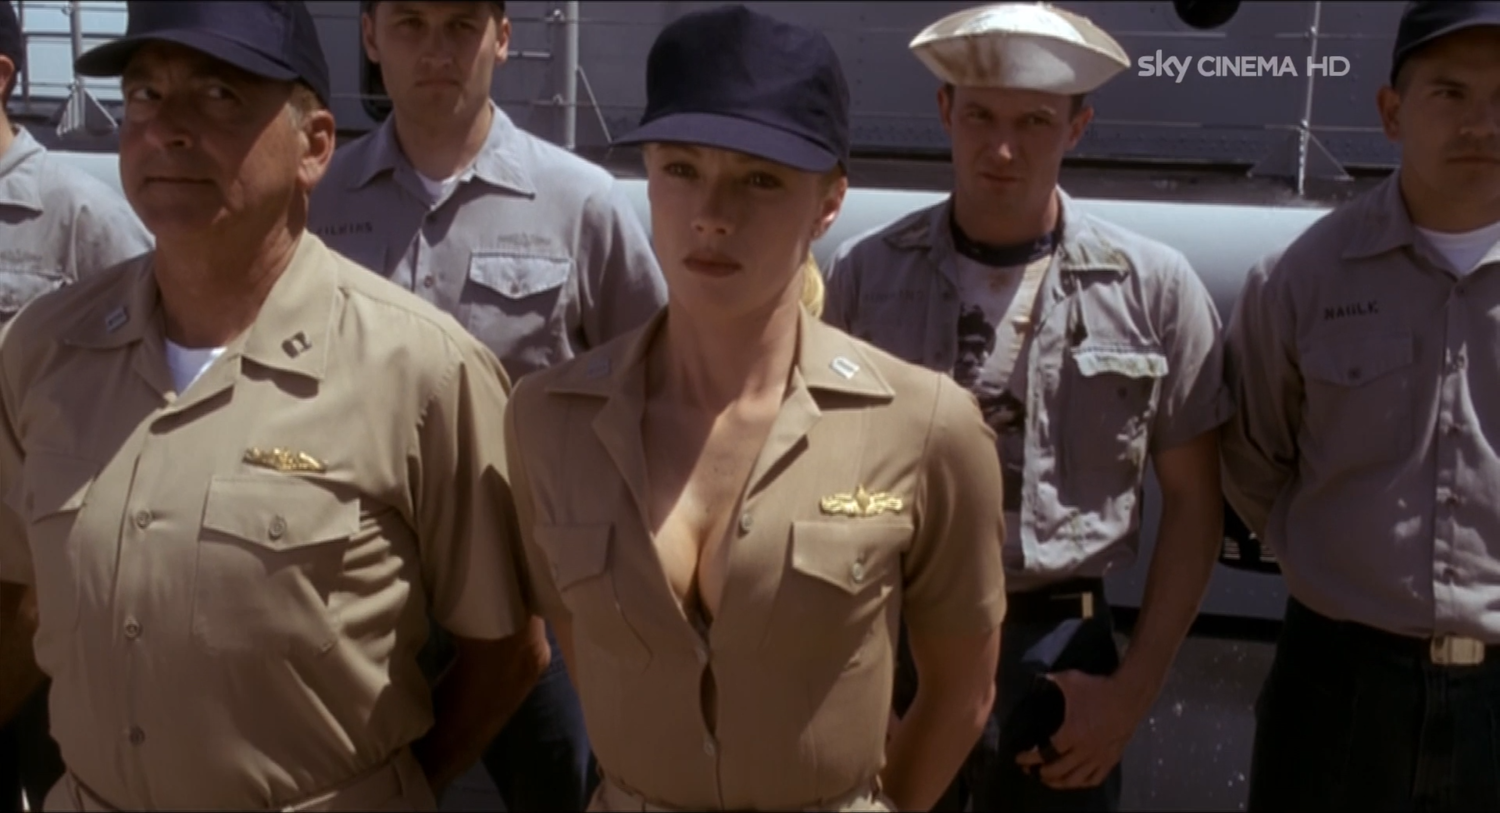 Down periscope lauren holly